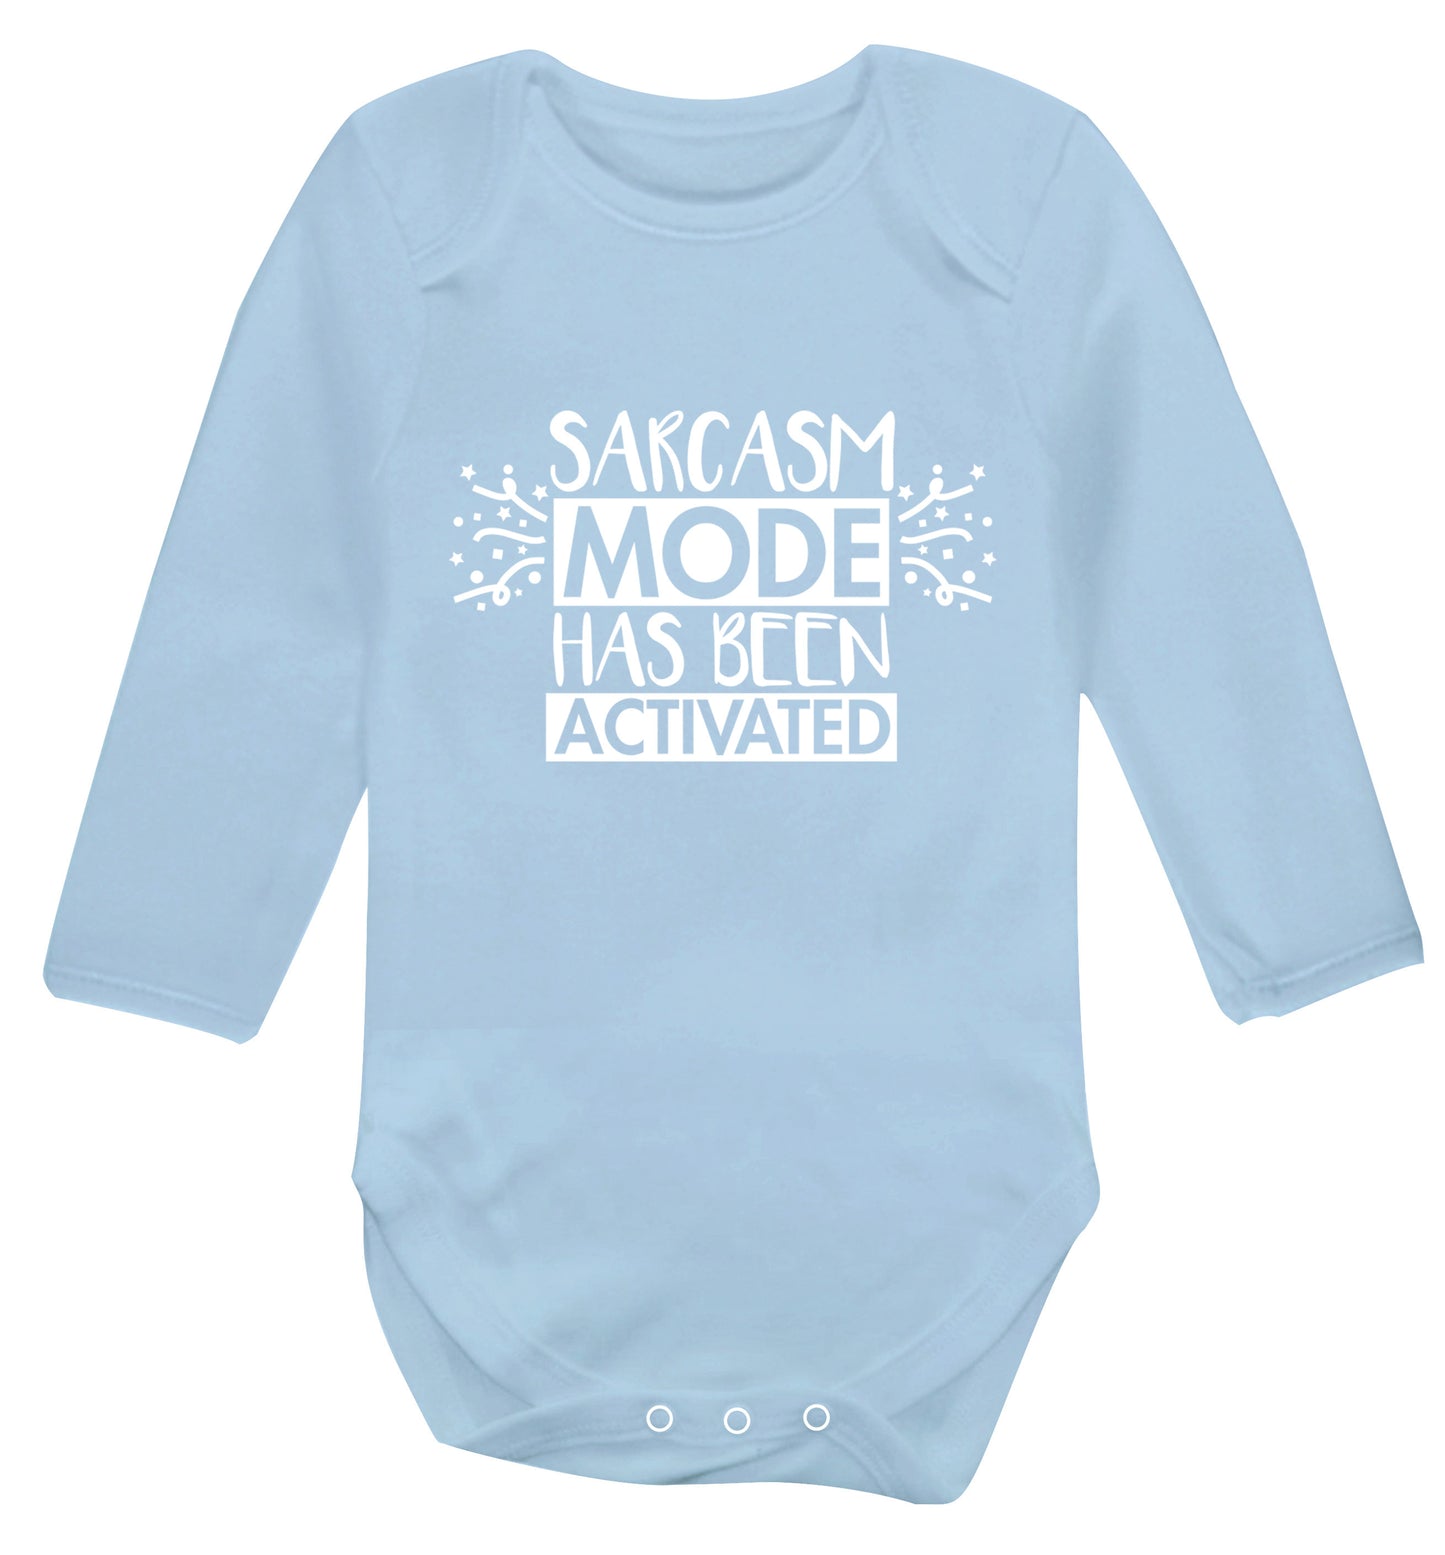 Sarcarsm mode has been activated Baby Vest long sleeved pale blue 6-12 months